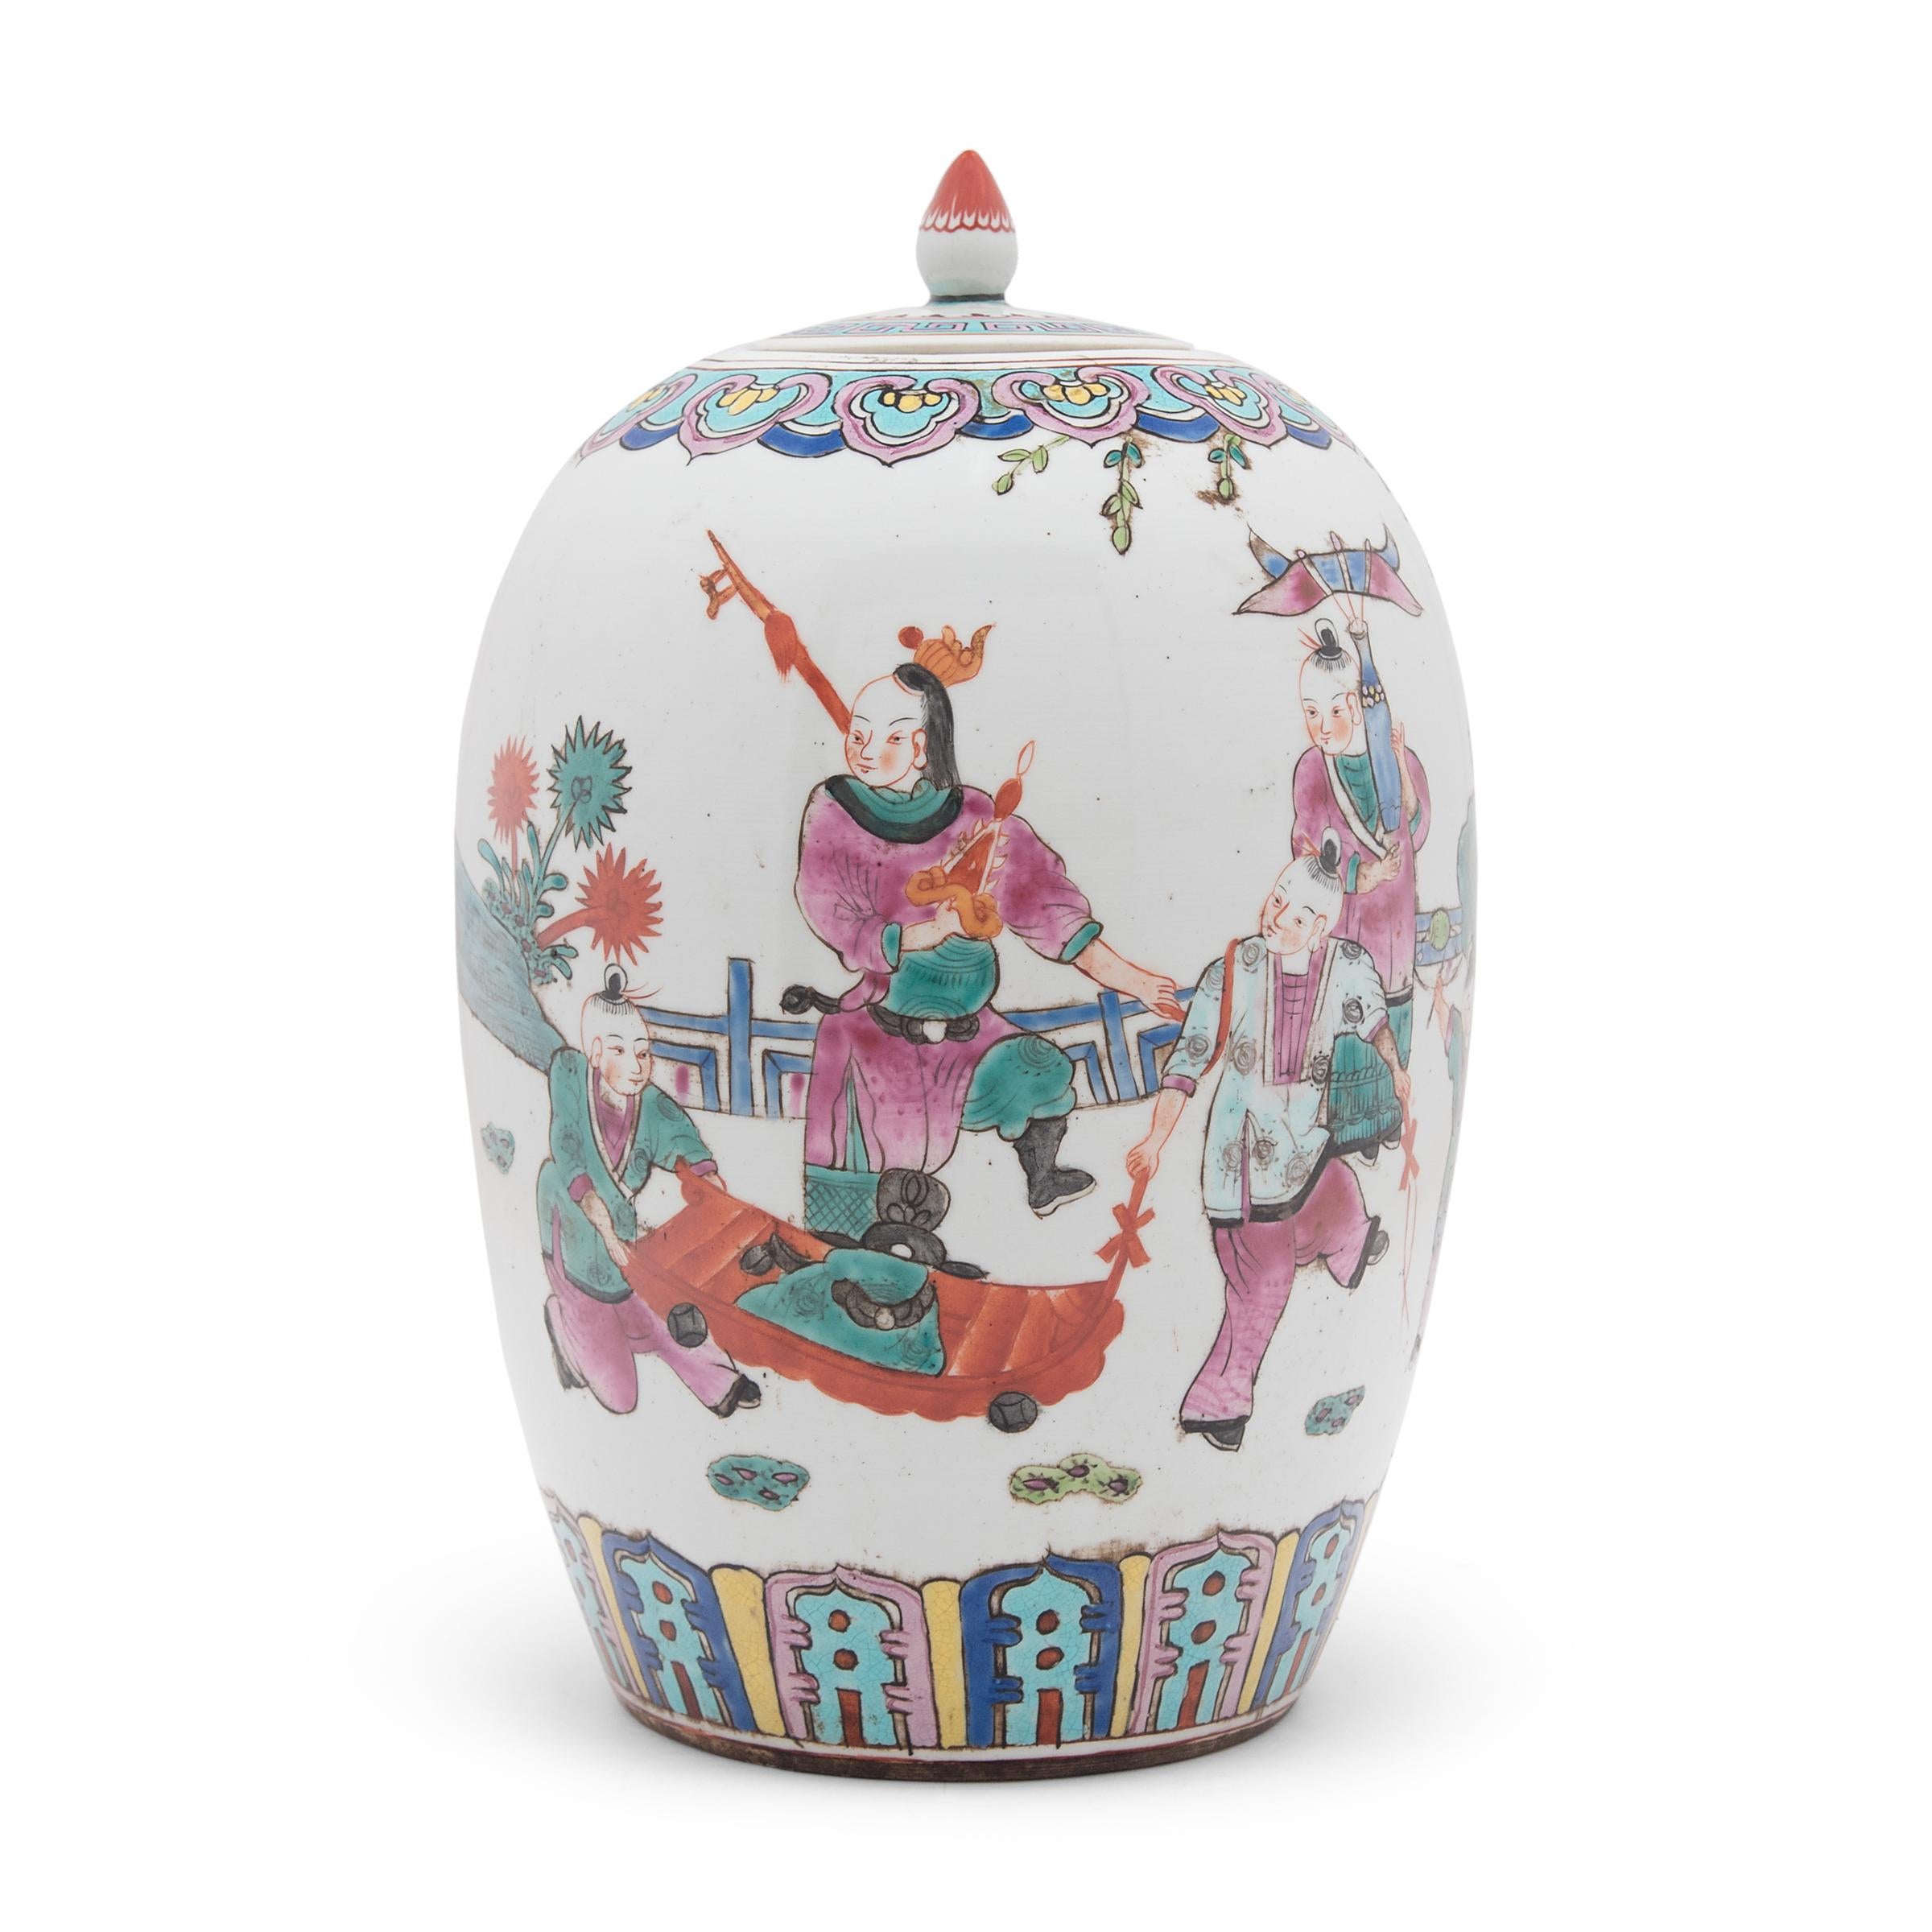 Enameled Chinese Famille Rose Ginger Jar with Boys at Play, c. 1900